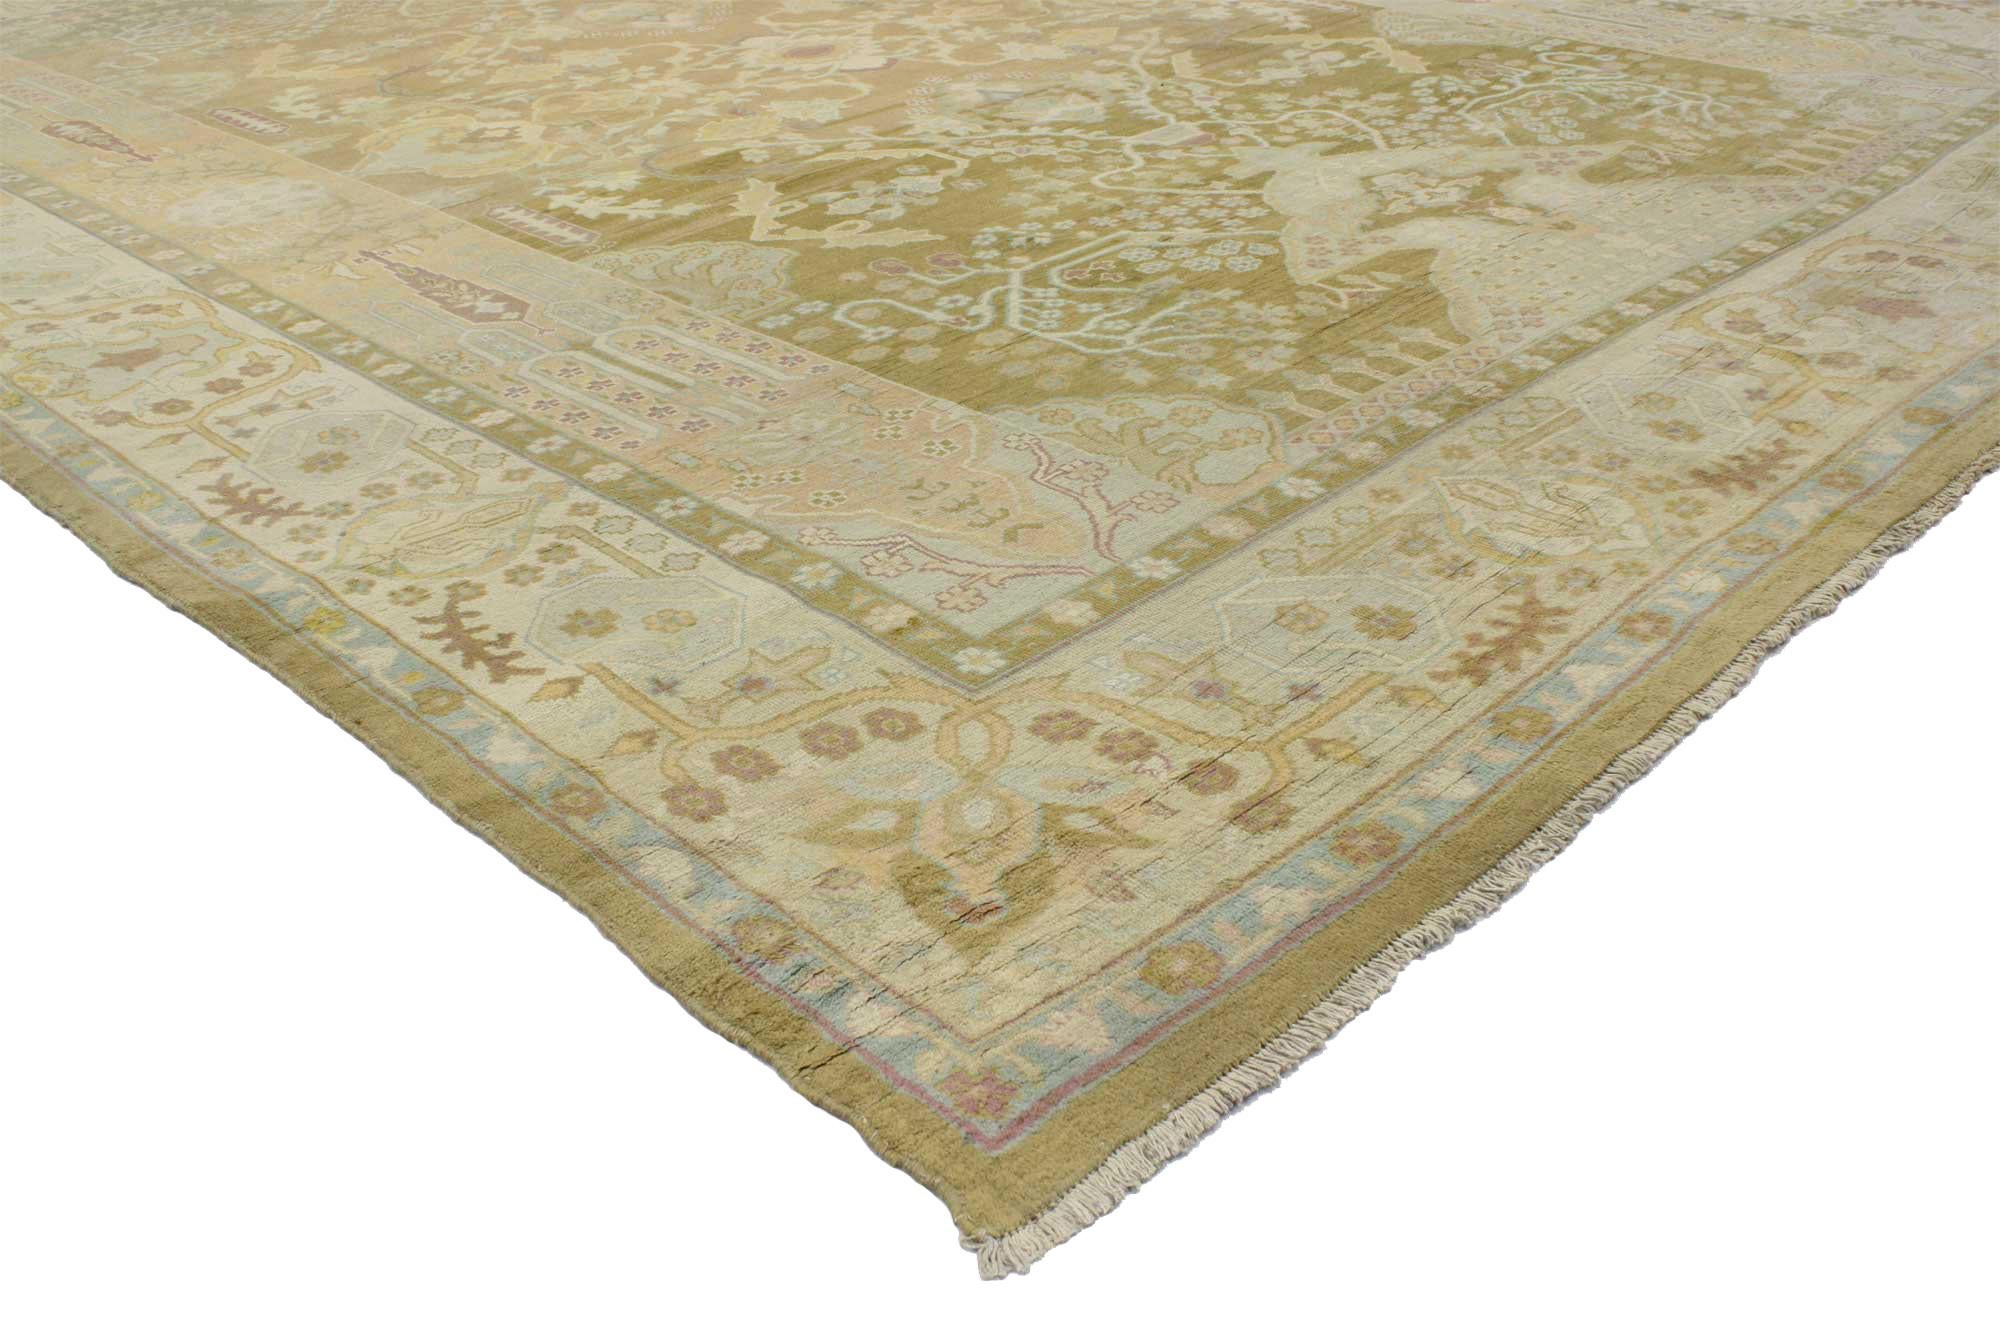 19th Century Antique Indian Agra Area Rug in Neutral Colors For Sale